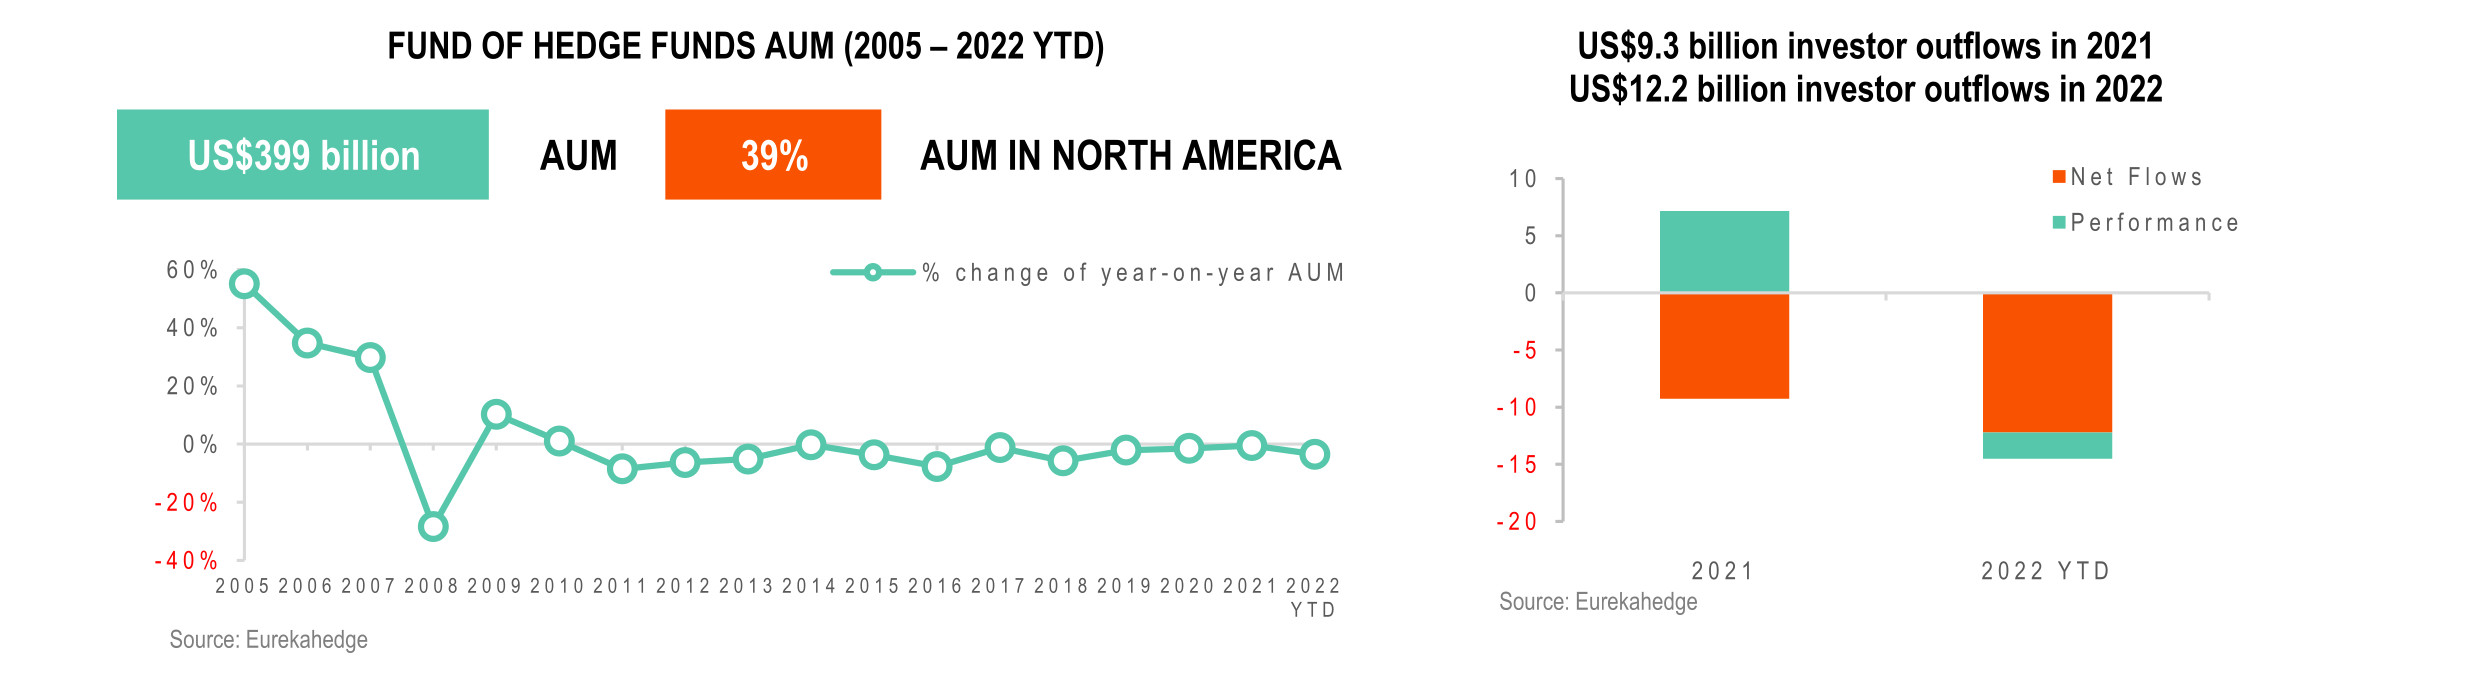 Fund of Hedge Funds Infographic June 2022 - AUM